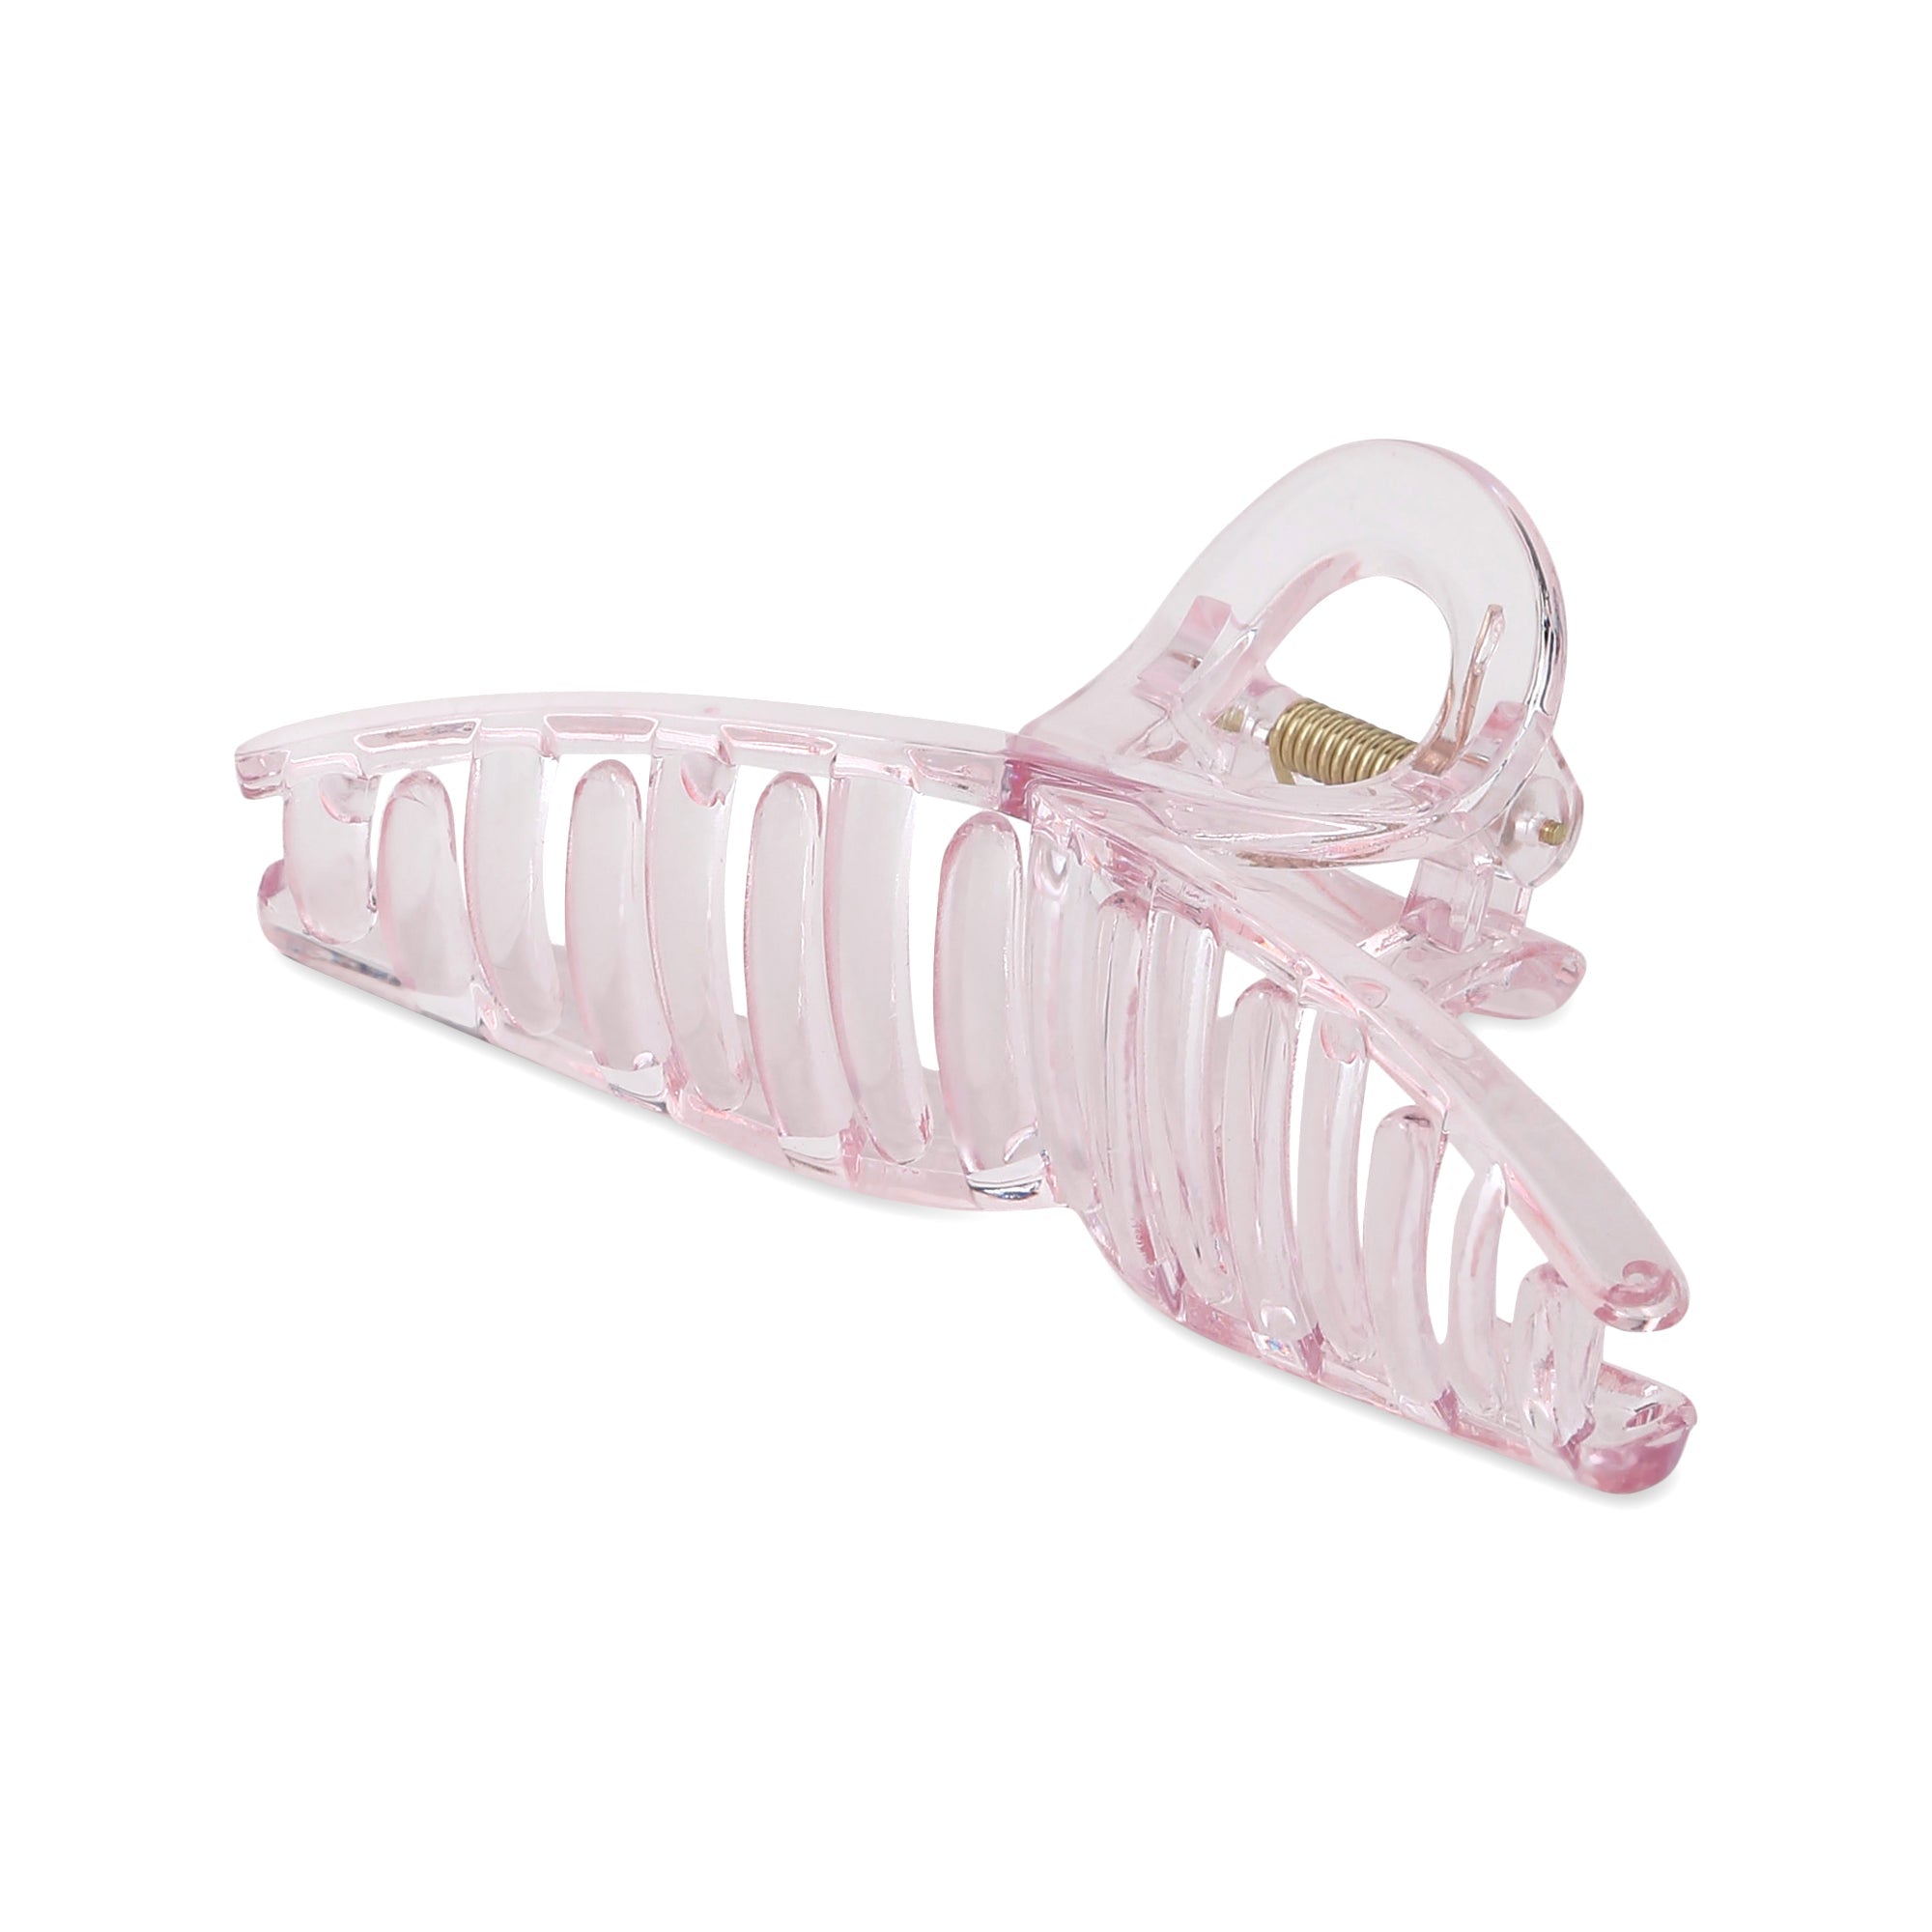 Accessorize London Women's Pink Translucent Hair Claw Clip